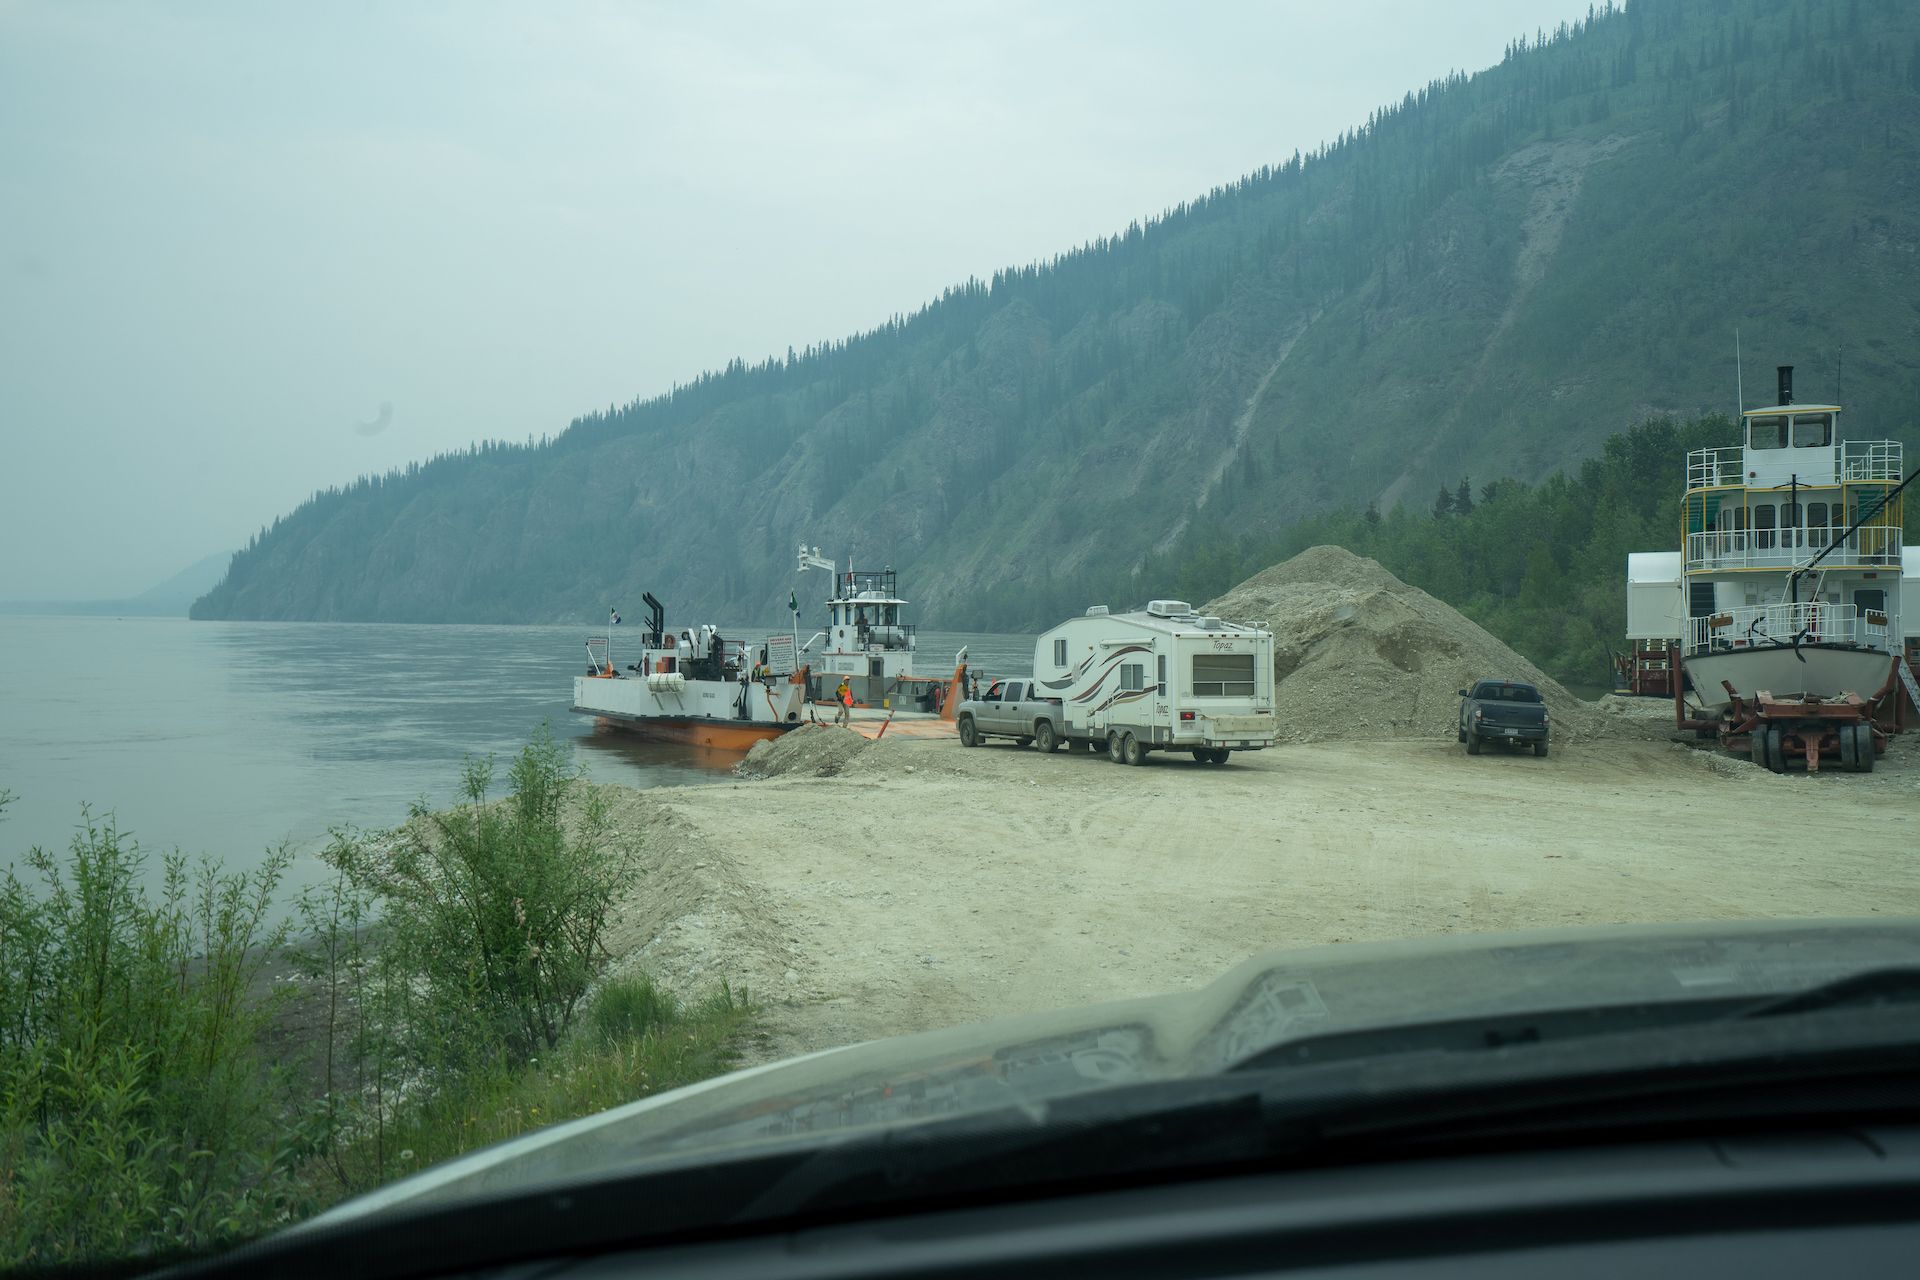 The only way to cross the Yukon river in Dawson City is to take a ferry! Because of high-water level, the operation was running slow. I waited in line 2 hours to get on the ferry.